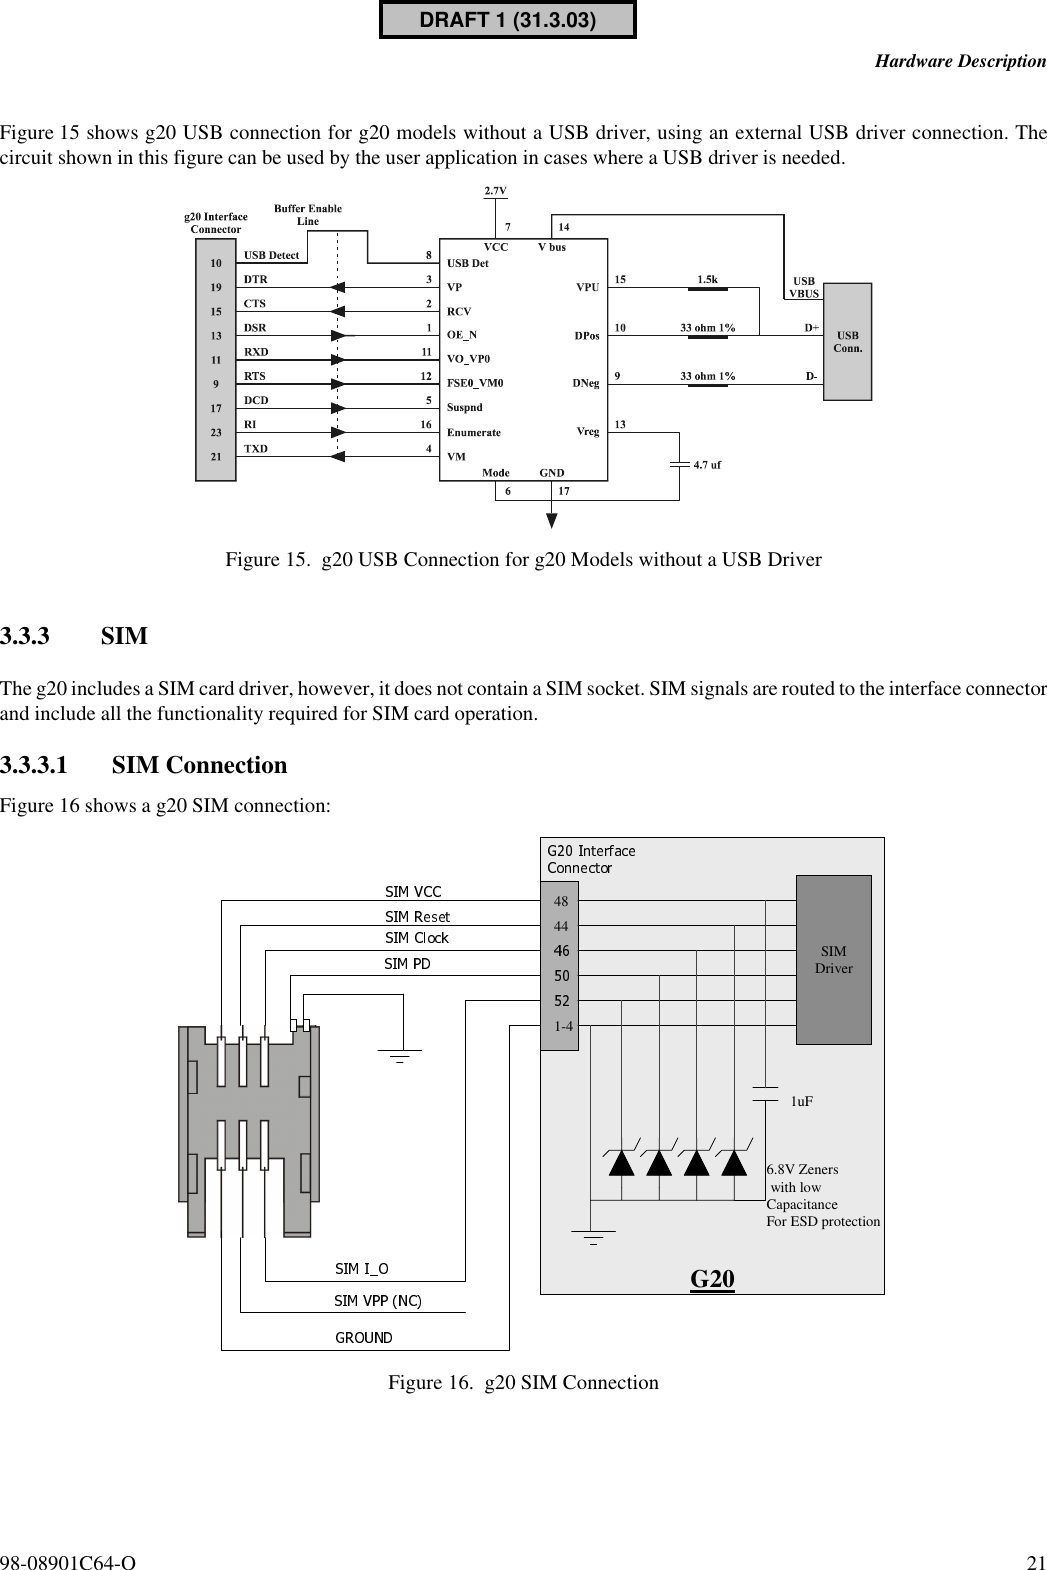 98-08901C64-O 21Hardware DescriptionFigure 15 shows g20 USB connection for g20 models without a USB driver, using an external USB driver connection. Thecircuit shown in this figure can be used by the user application in cases where a USB driver is needed.Figure 15. g20 USB Connection for g20 Models without a USB Driver 3.3.3 SIMThe g20 includes a SIM card driver, however, it does not contain a SIM socket. SIM signals are routed to the interface connectorand include all the functionality required for SIM card operation.3.3.3.1 SIM ConnectionFigure 16 shows a g20 SIM connection:Figure 16. g20 SIM Connection48441-4SIMDriver6.8V Zenerswith lowCapacitanceFor ESD protection1uFG20DRAFT 1 (31.3.03)